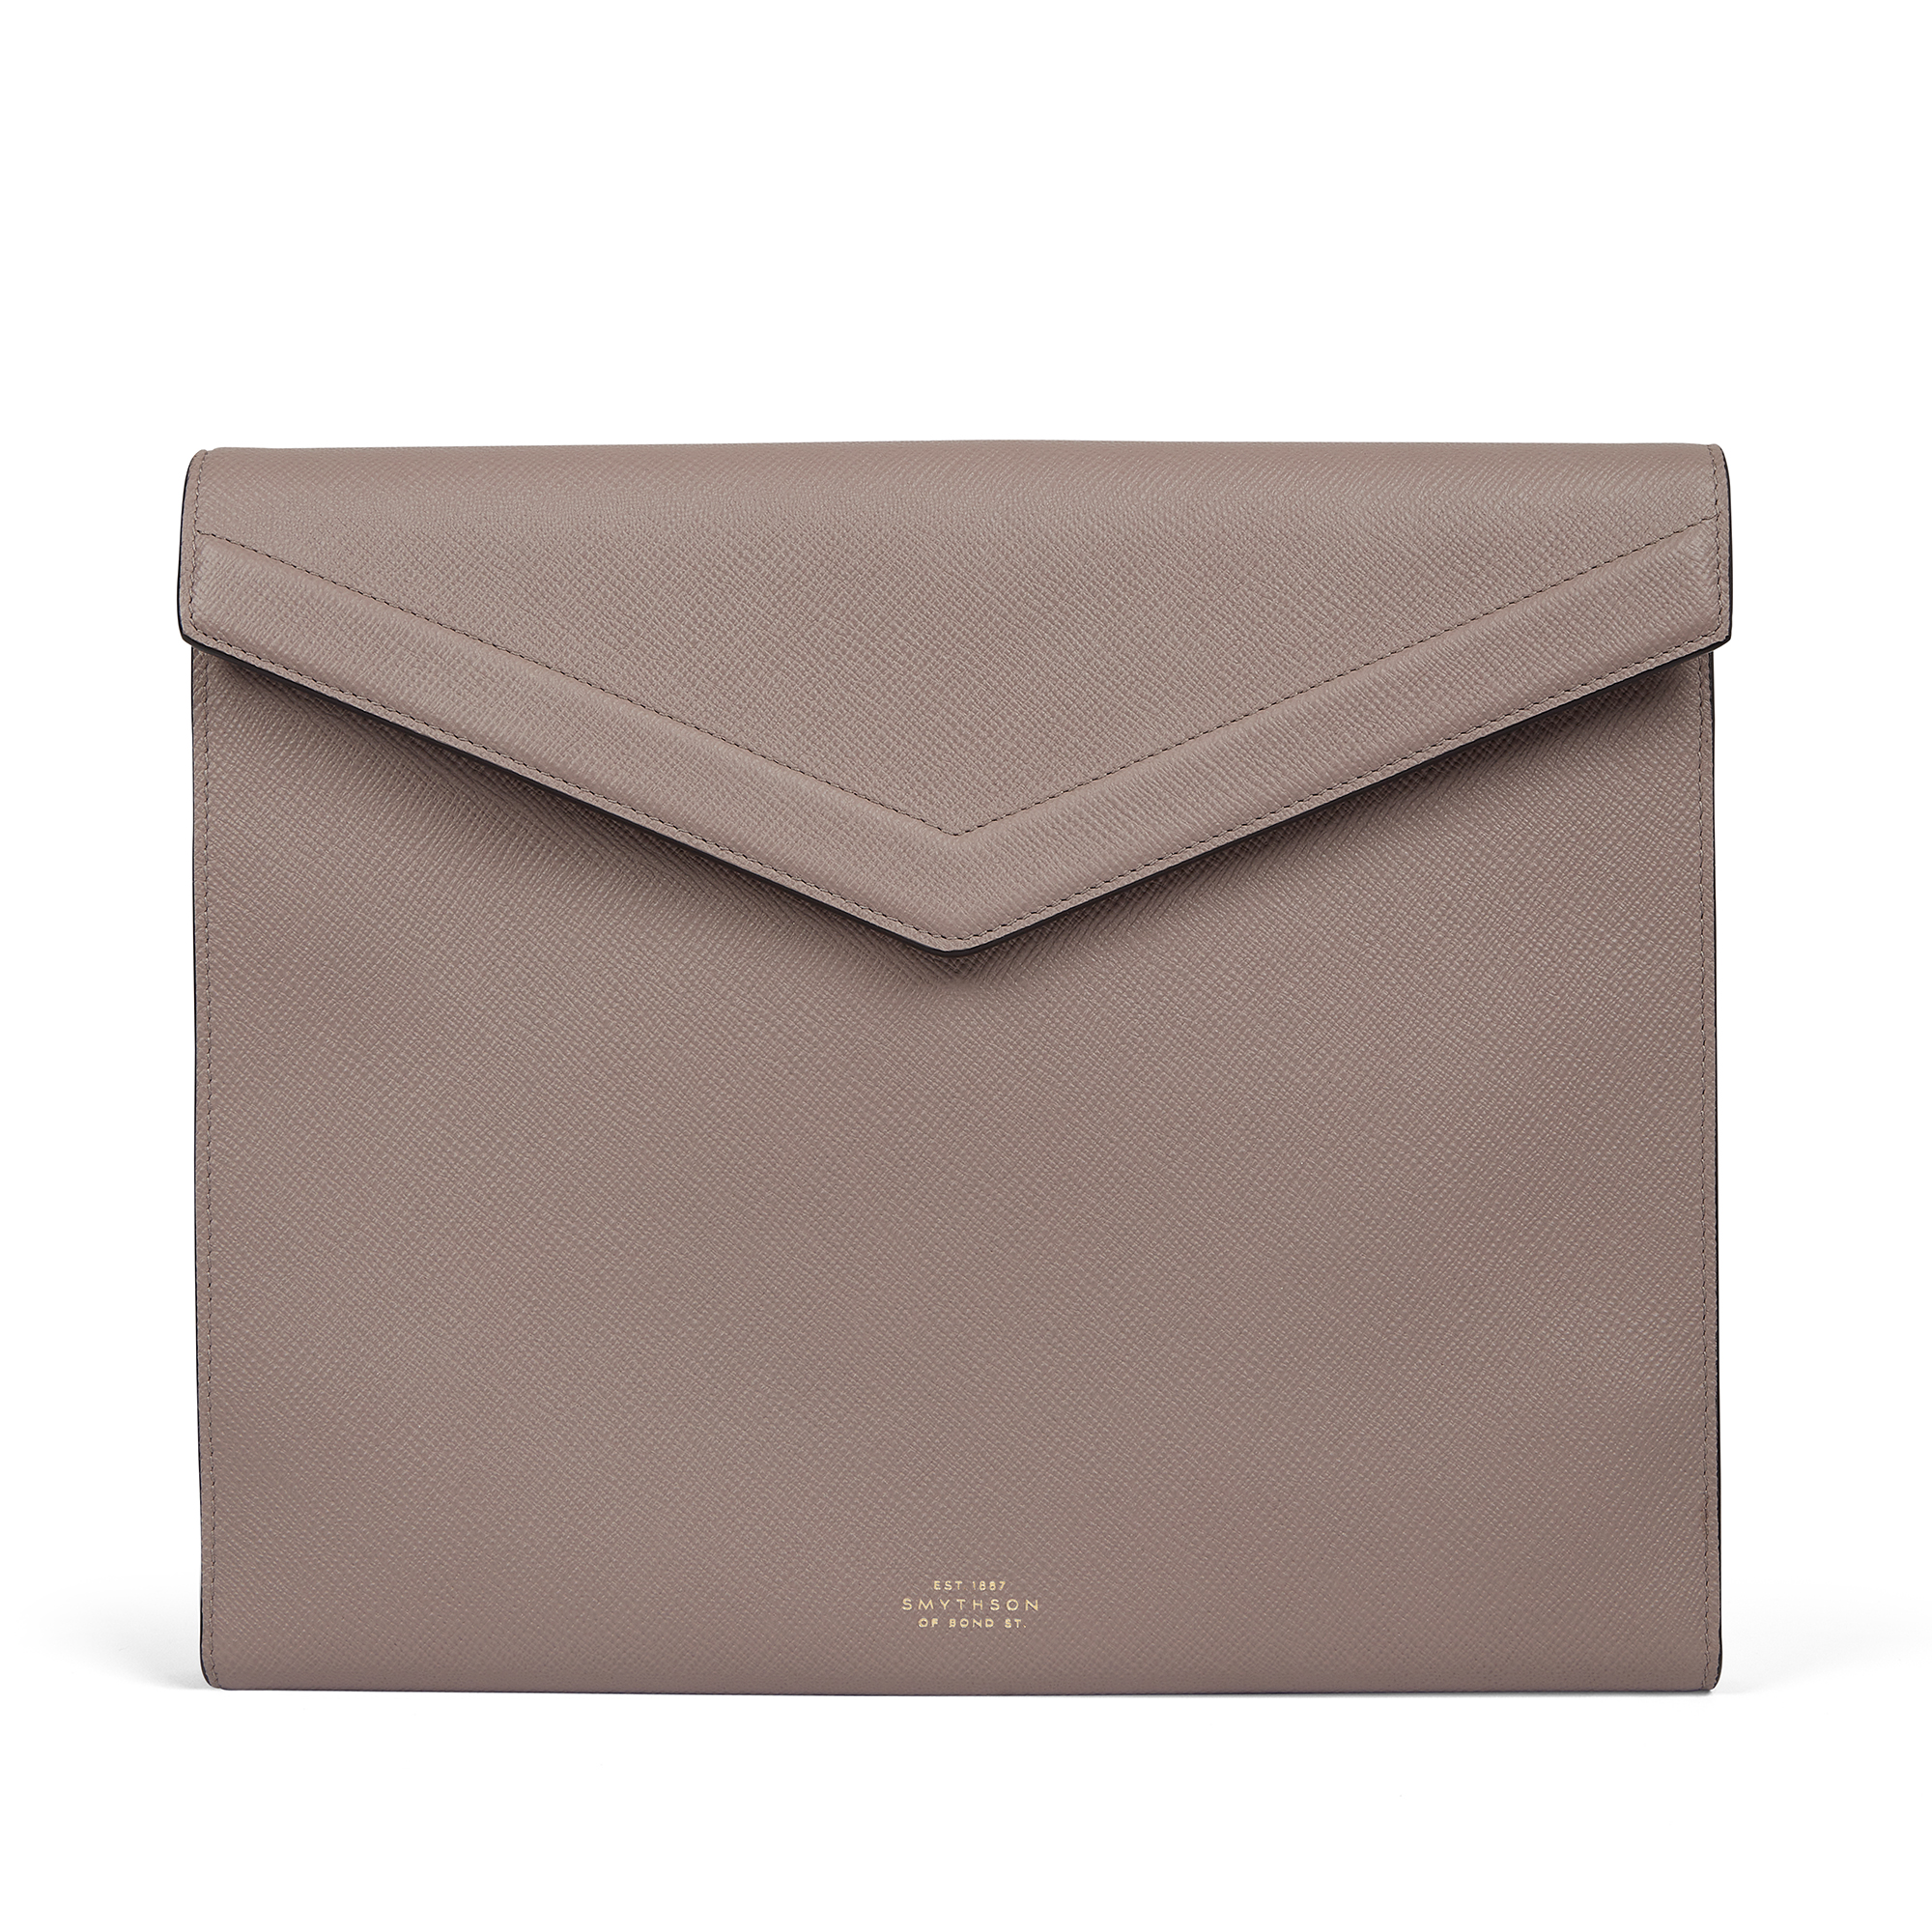 Smythson A4 Envelope Writing Folder In Panama In Taupe